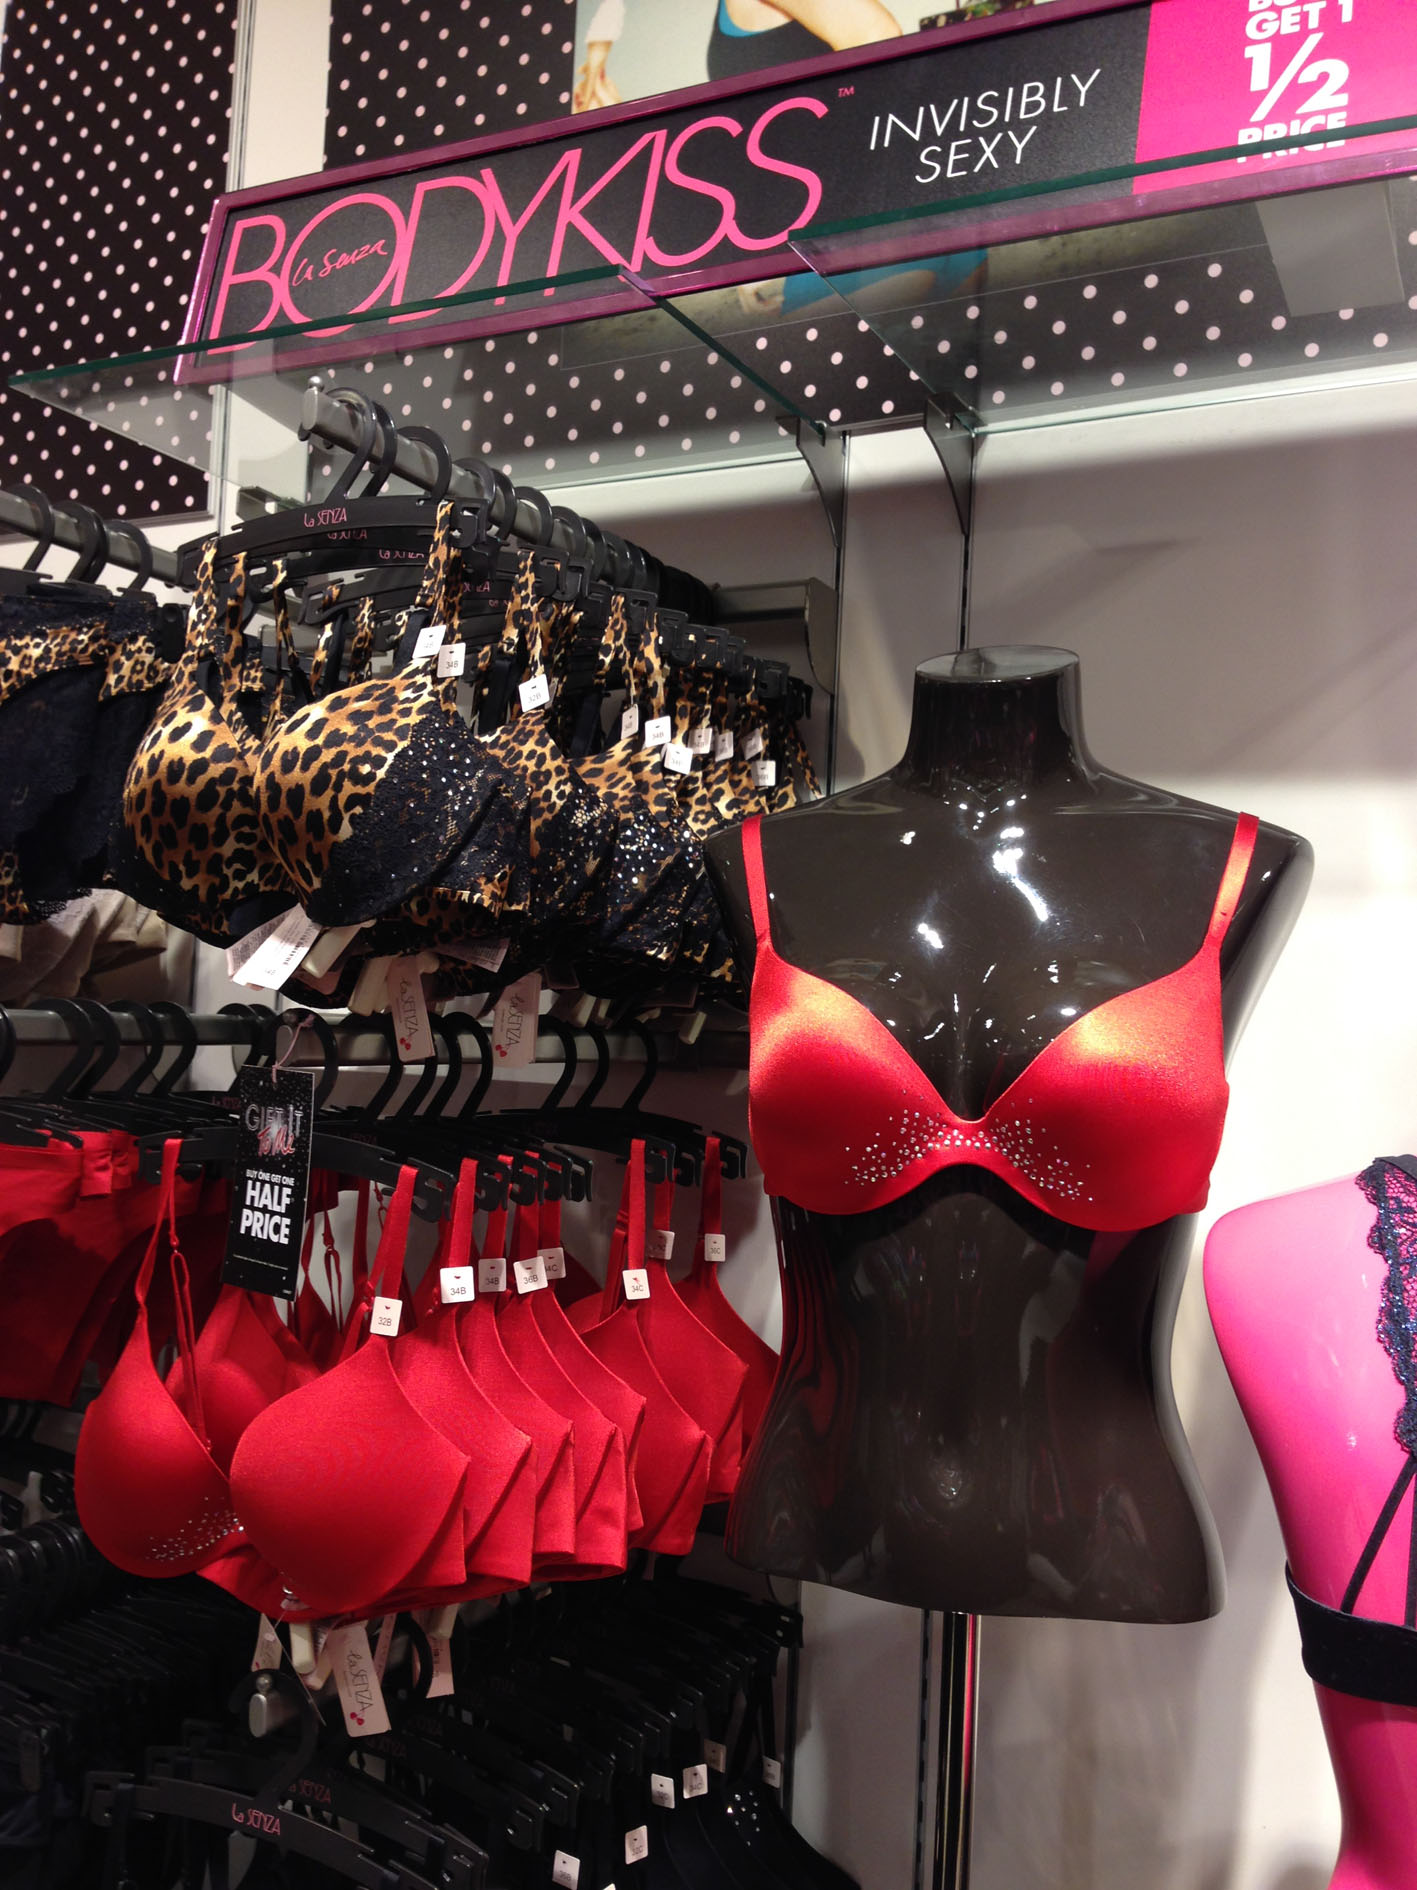 La Senza - SEXY FACT: U get a FREE bra when you buy one in stores